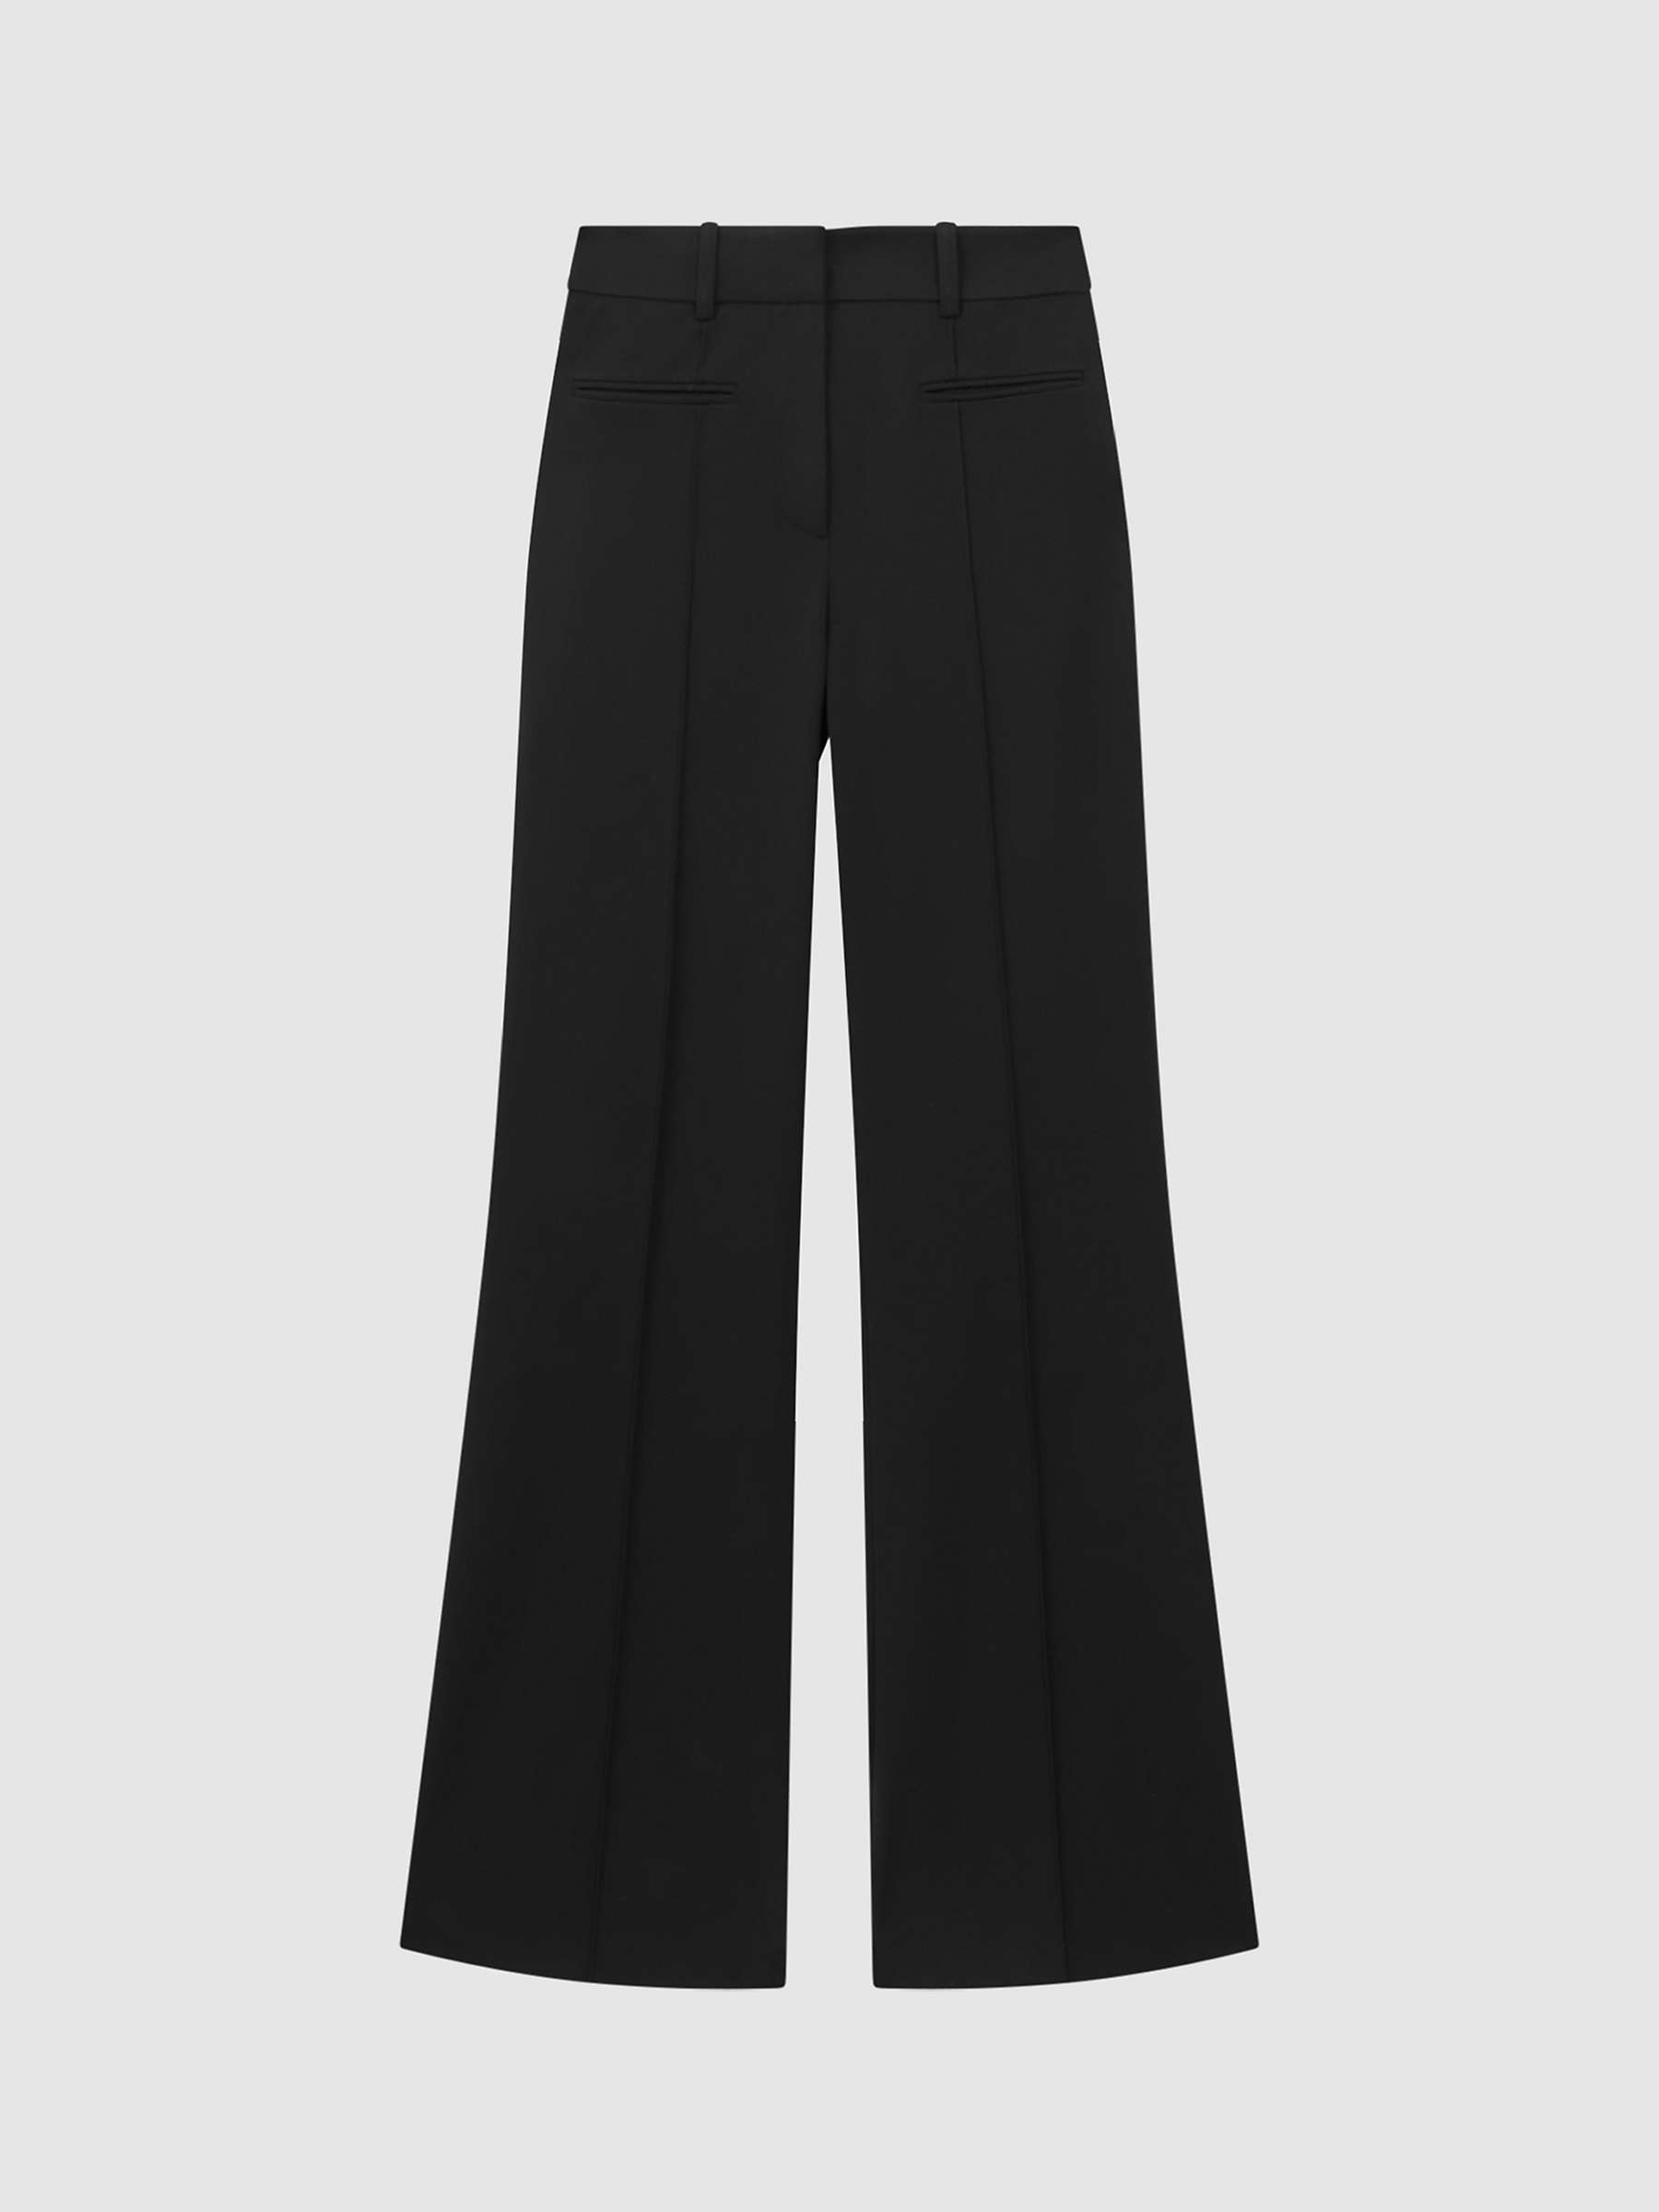 Buy Reiss Claude Flared Tailored Trousers, Black Online at johnlewis.com